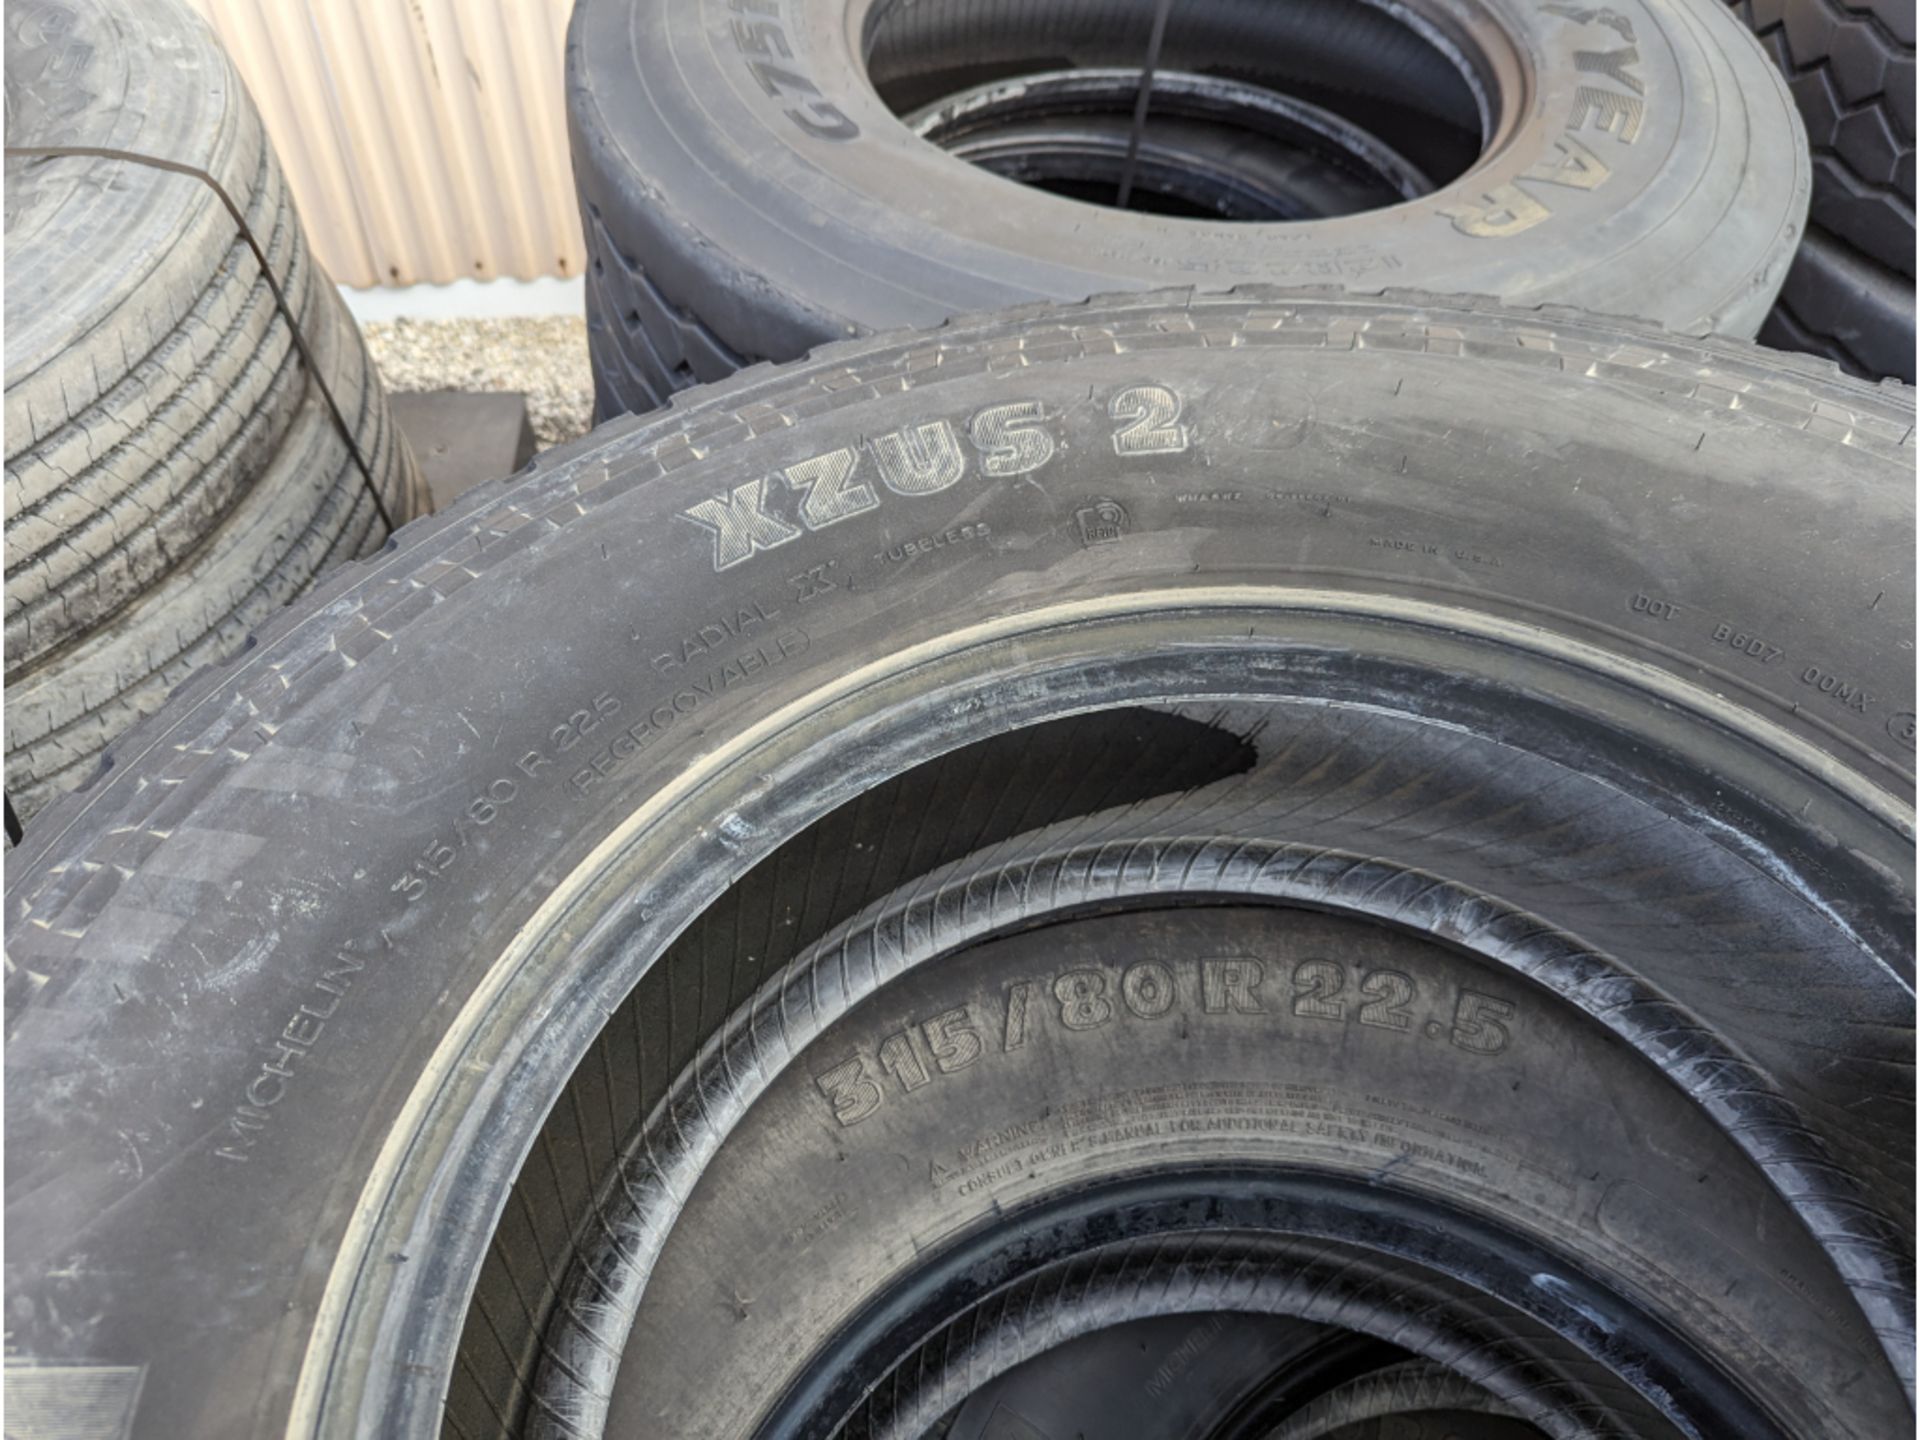 (4) Michelin XZUS 2 315/80R22.5 commercial truck tires USED Virgin Tread Surplus Take Off - Image 5 of 6